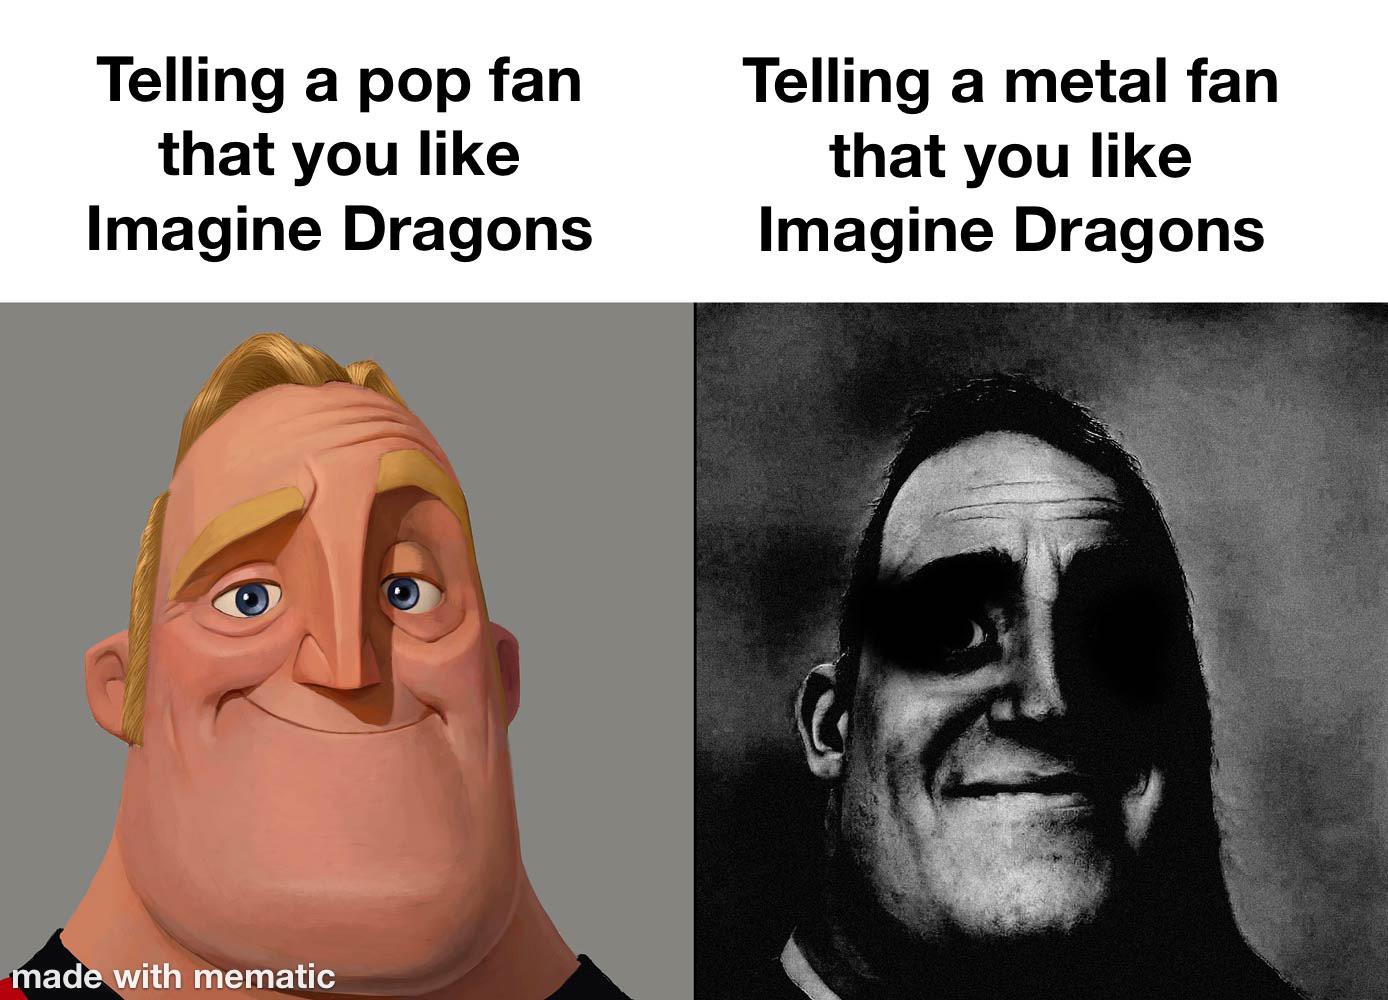 funny memes and pics - Meme - Telling a pop fan that you Imagine Dragons made with mematic Telling a metal fan that you Imagine Dragons